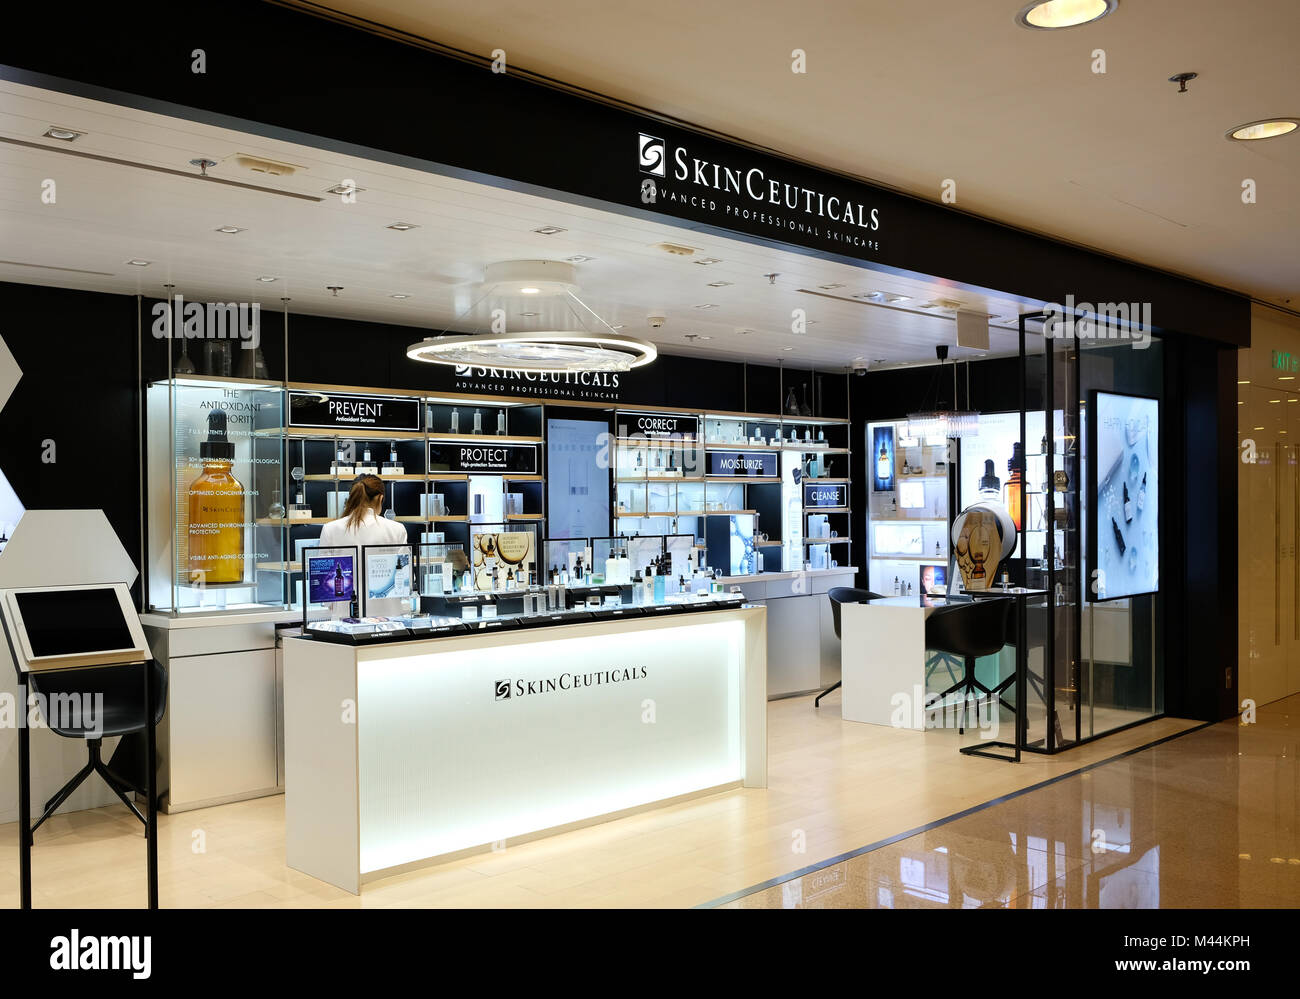 HONG KONG - FEBRUARY 4, 2018: SkinCeuticals shop in Hong Kong. SkinCeuticals is a skin care line founded in 1997 by Alden Pinnell and Russell Moon. Stock Photo